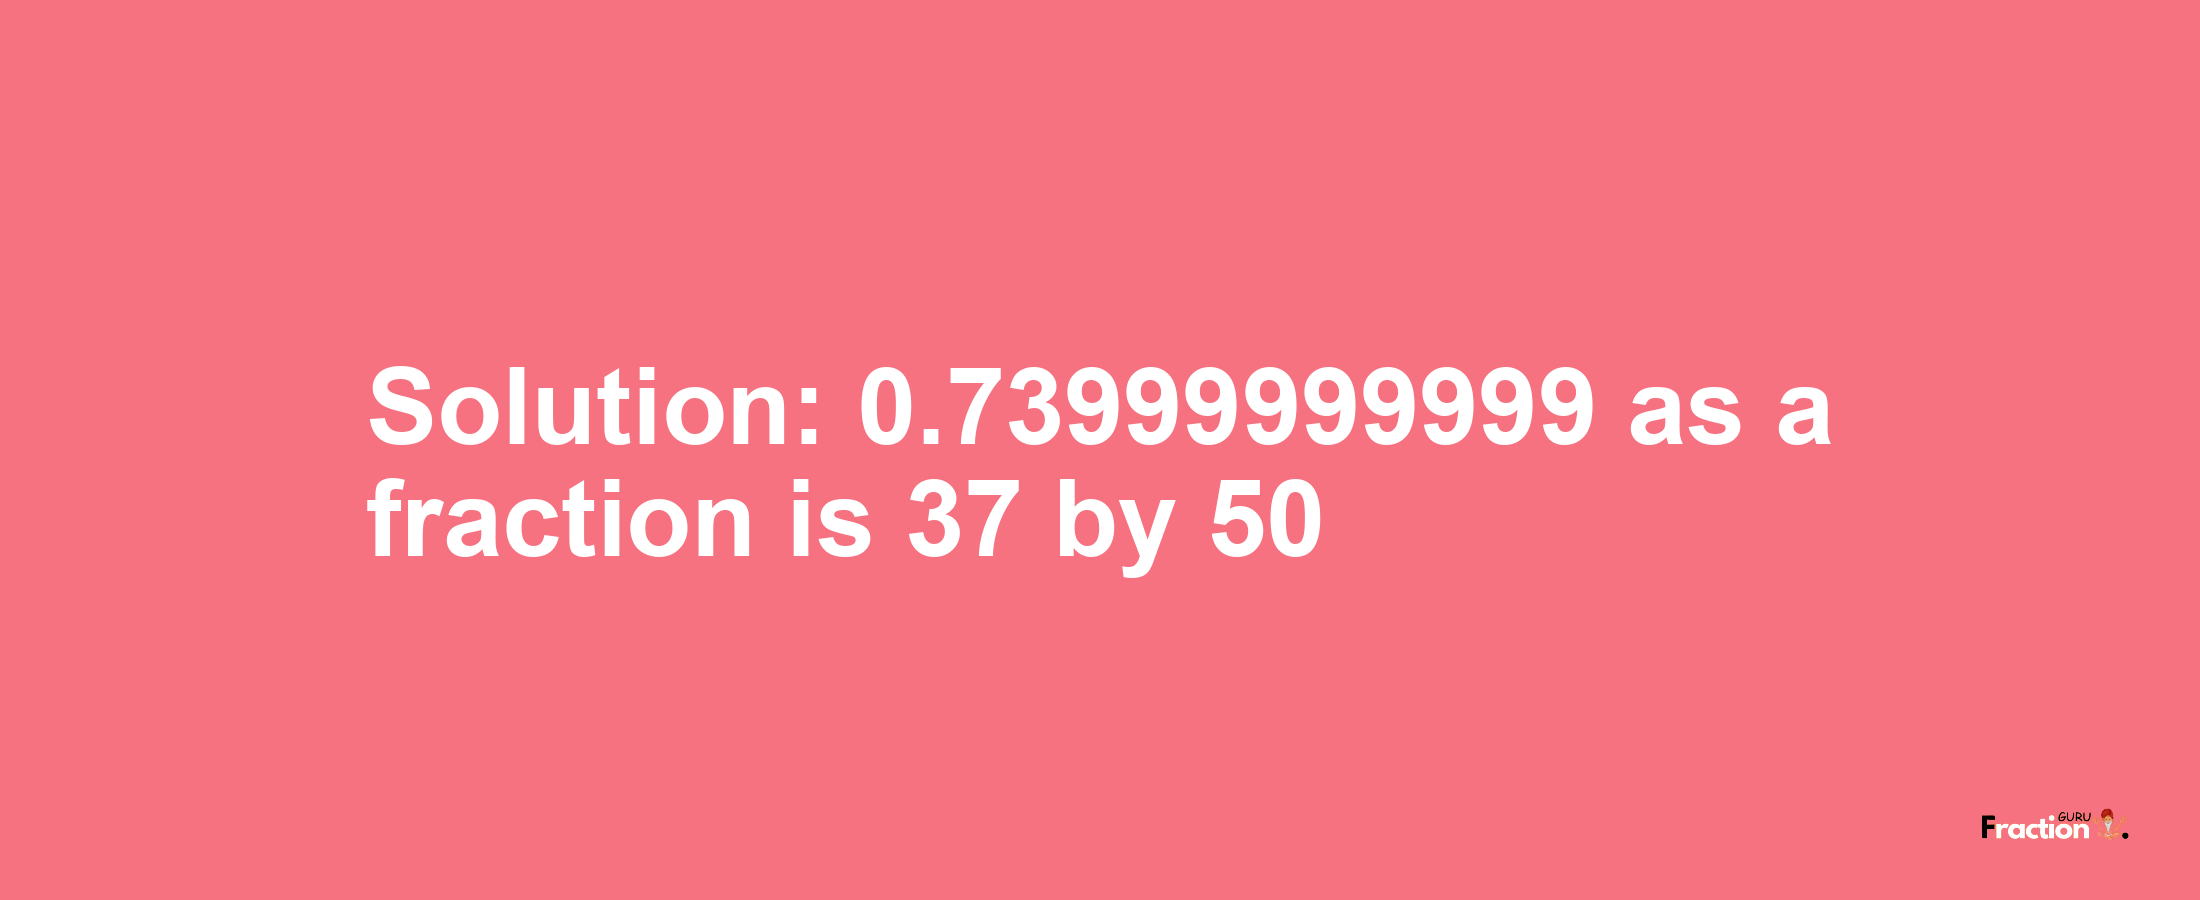 Solution:0.73999999999 as a fraction is 37/50